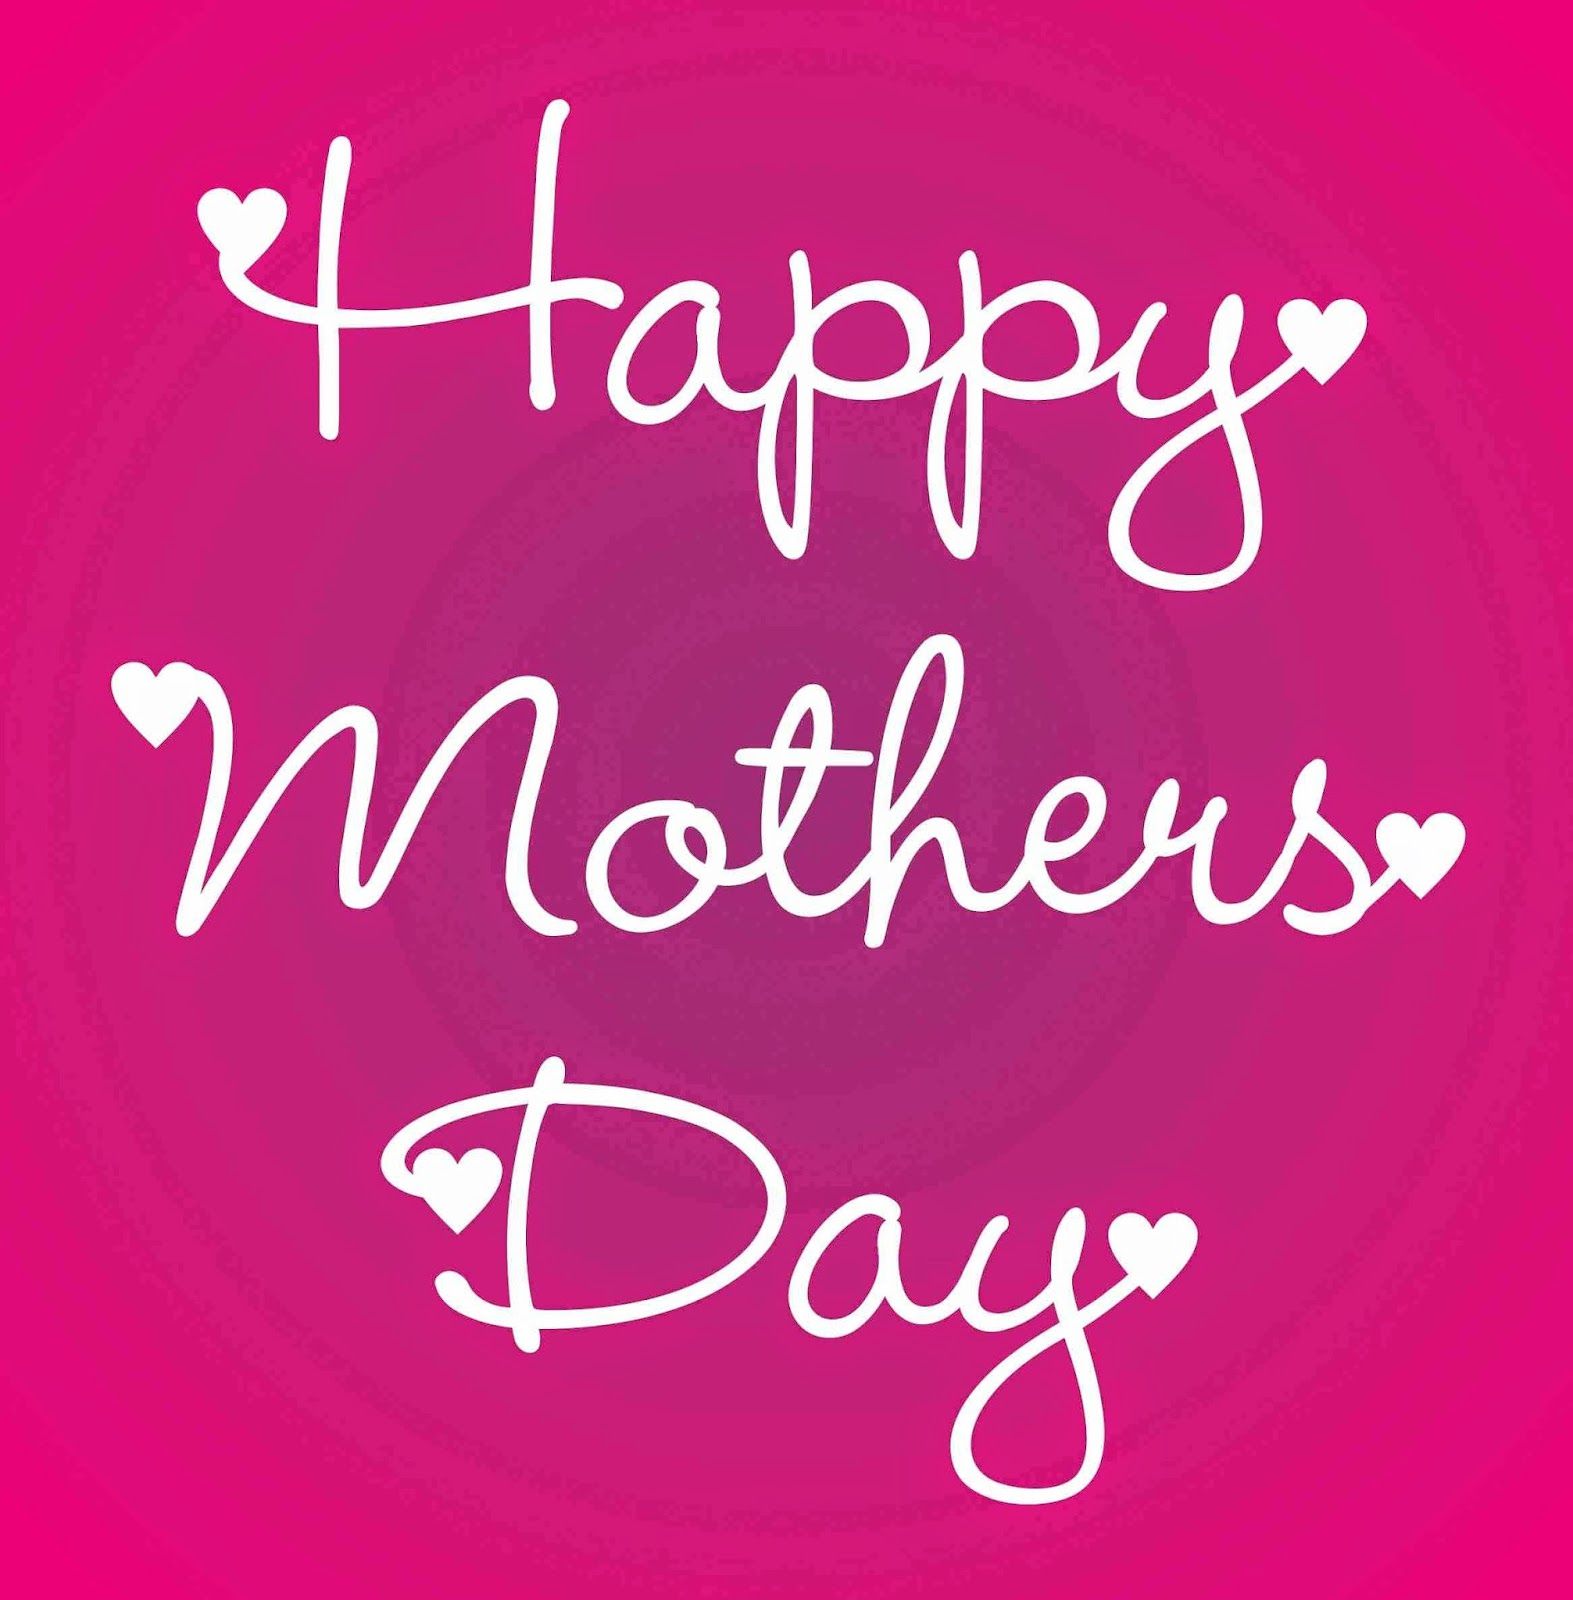 Happy Mother's Day Caring. Happy mothers day wishes, Mothers day